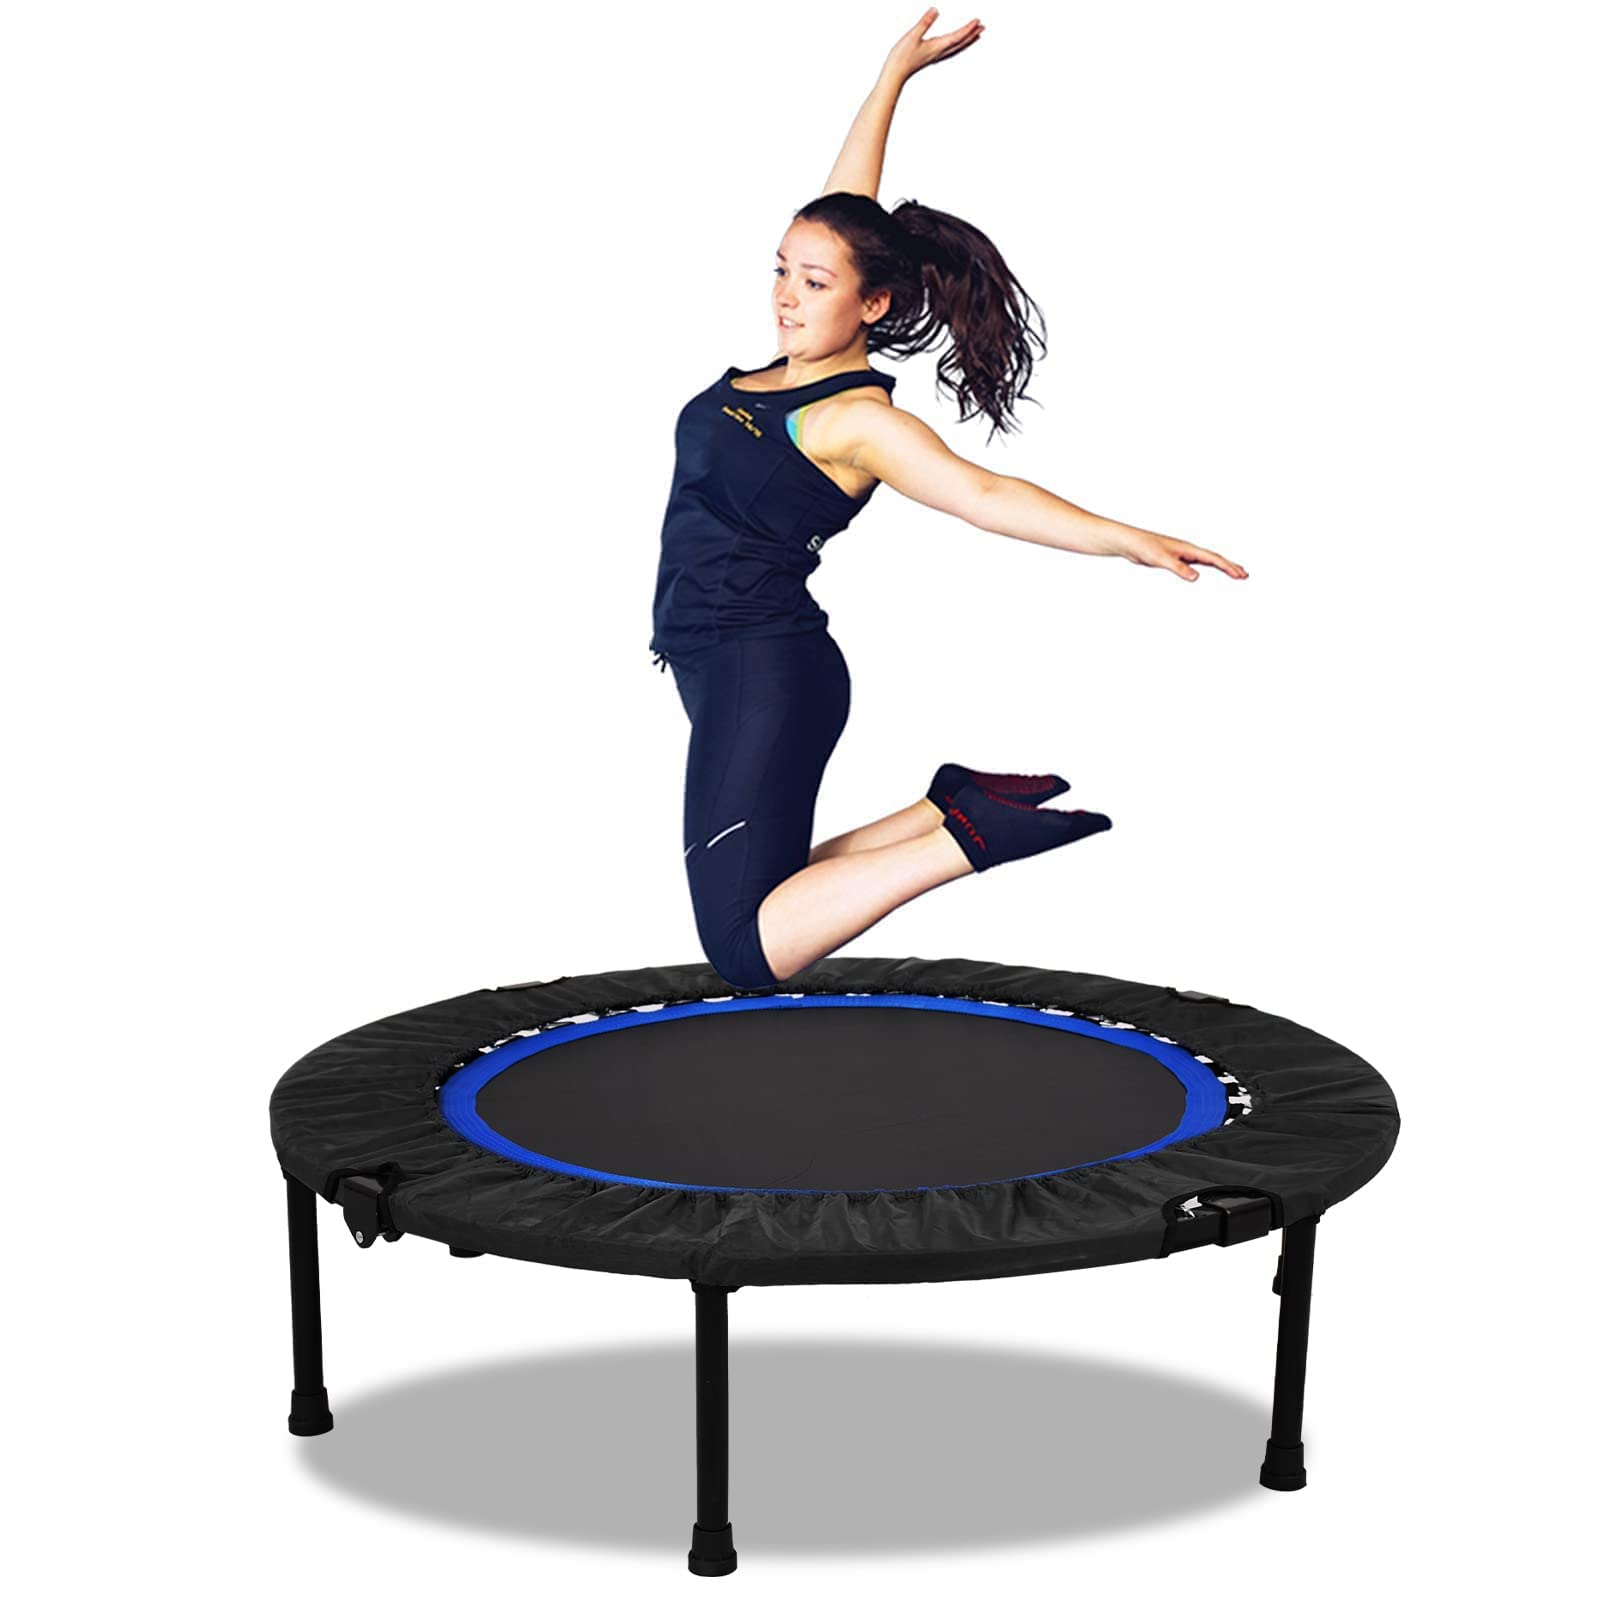 40" Mini Trampoline Stable Exercise Rebounder for Adult and Children Indoor Outdoor, Blue & Black